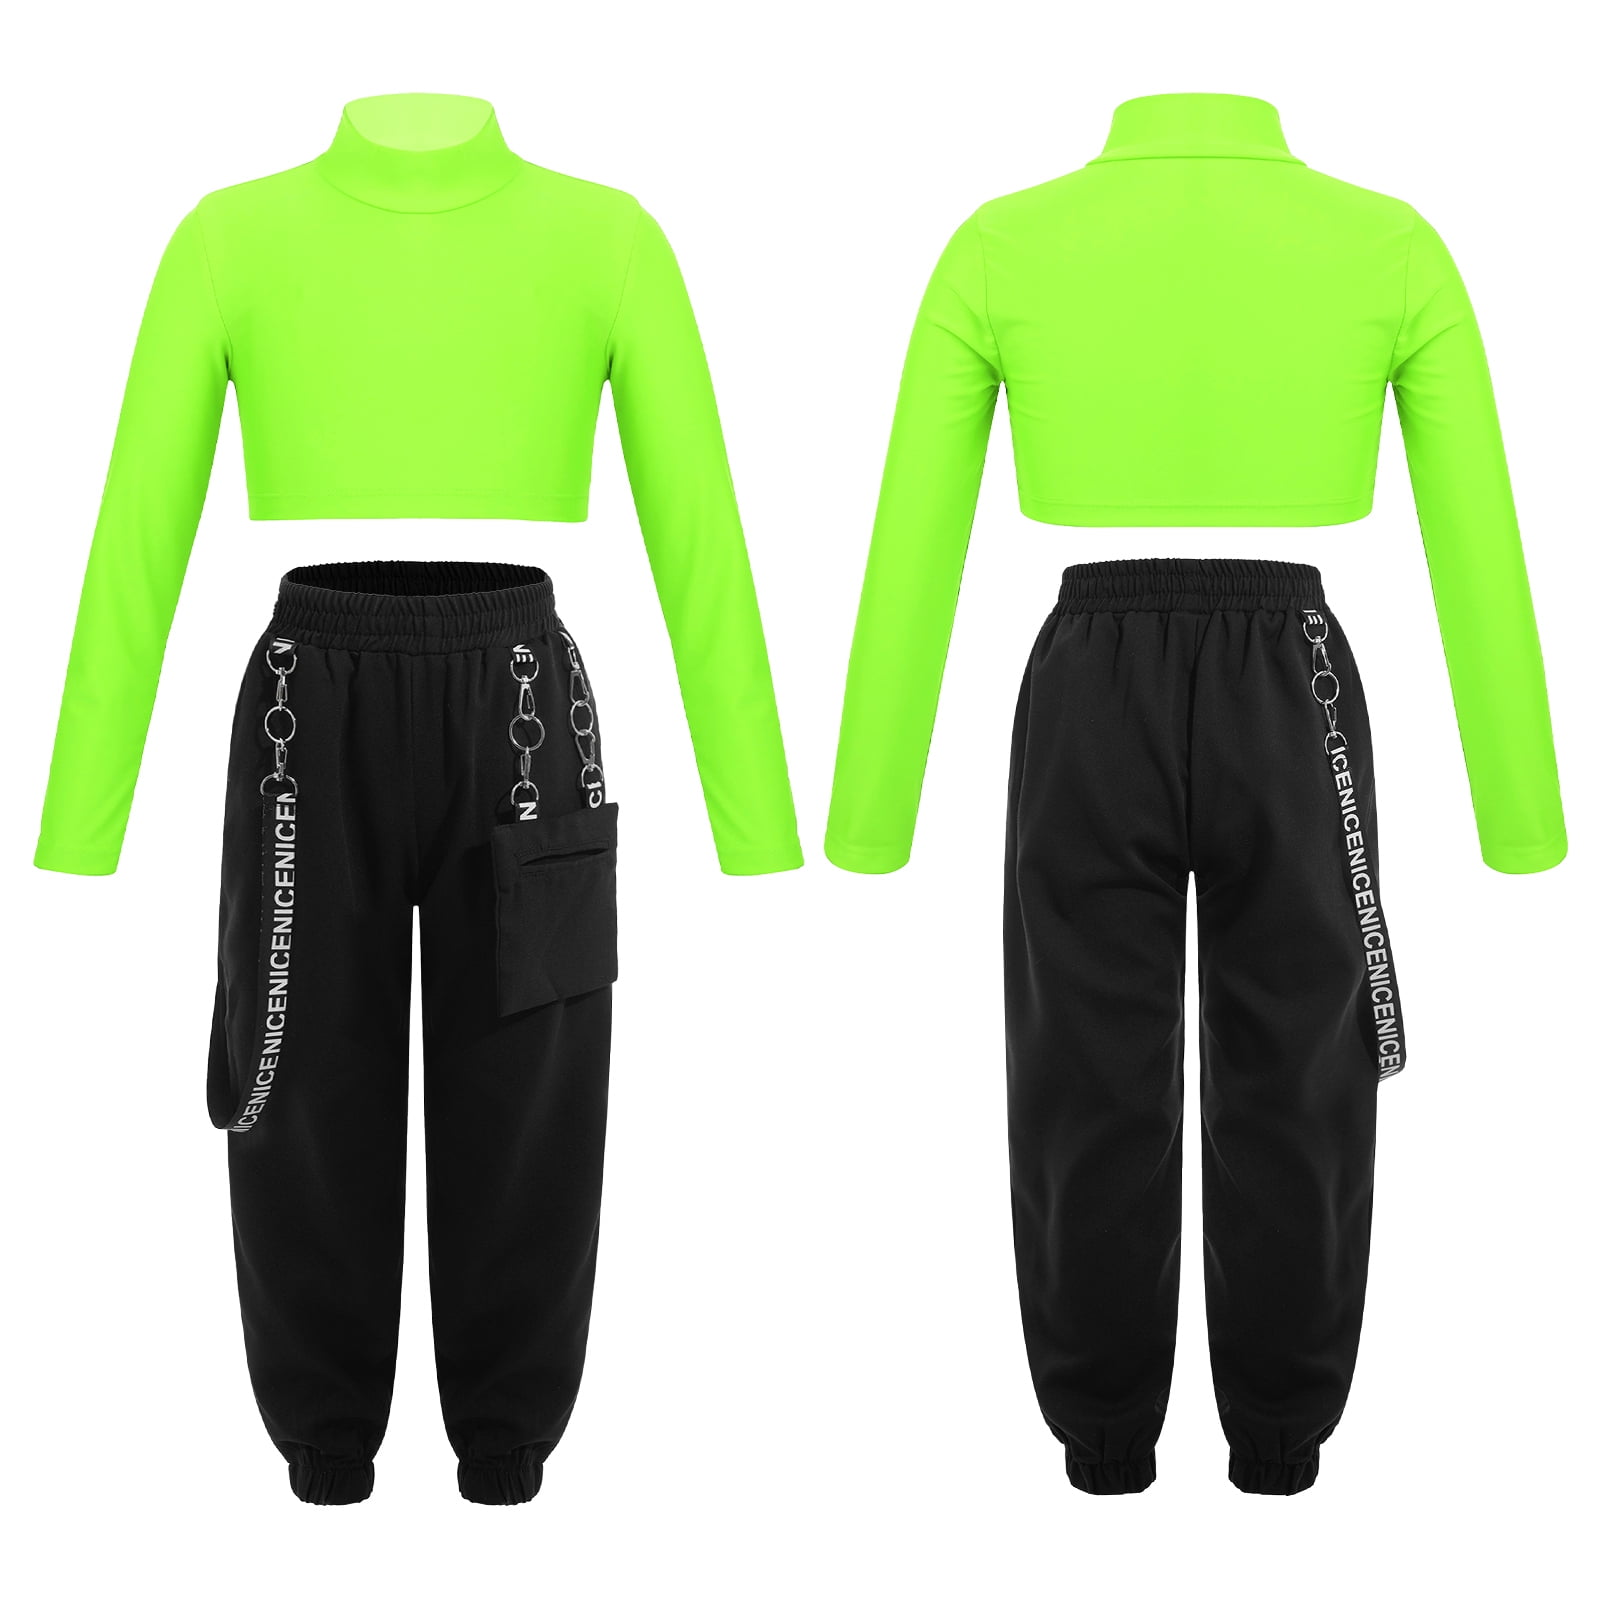 Activewear Tops (youth to adult sizes) – Dancespiration Designs